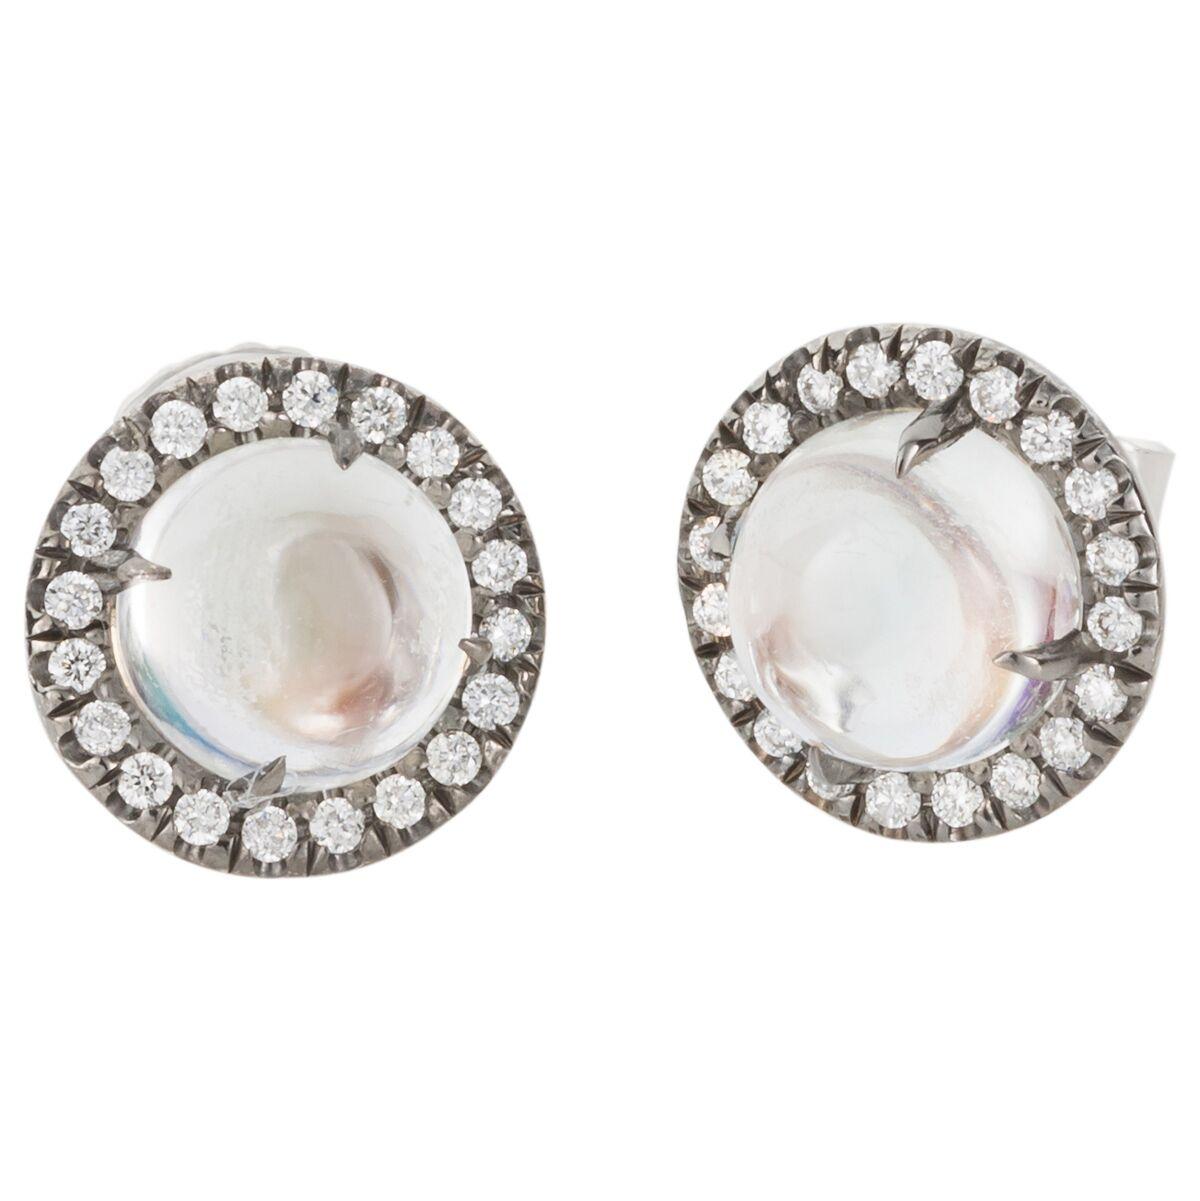 Contemporary 18 Karat White Gold Cabochon Moonstone and Diamond Stud Earrings For Sale